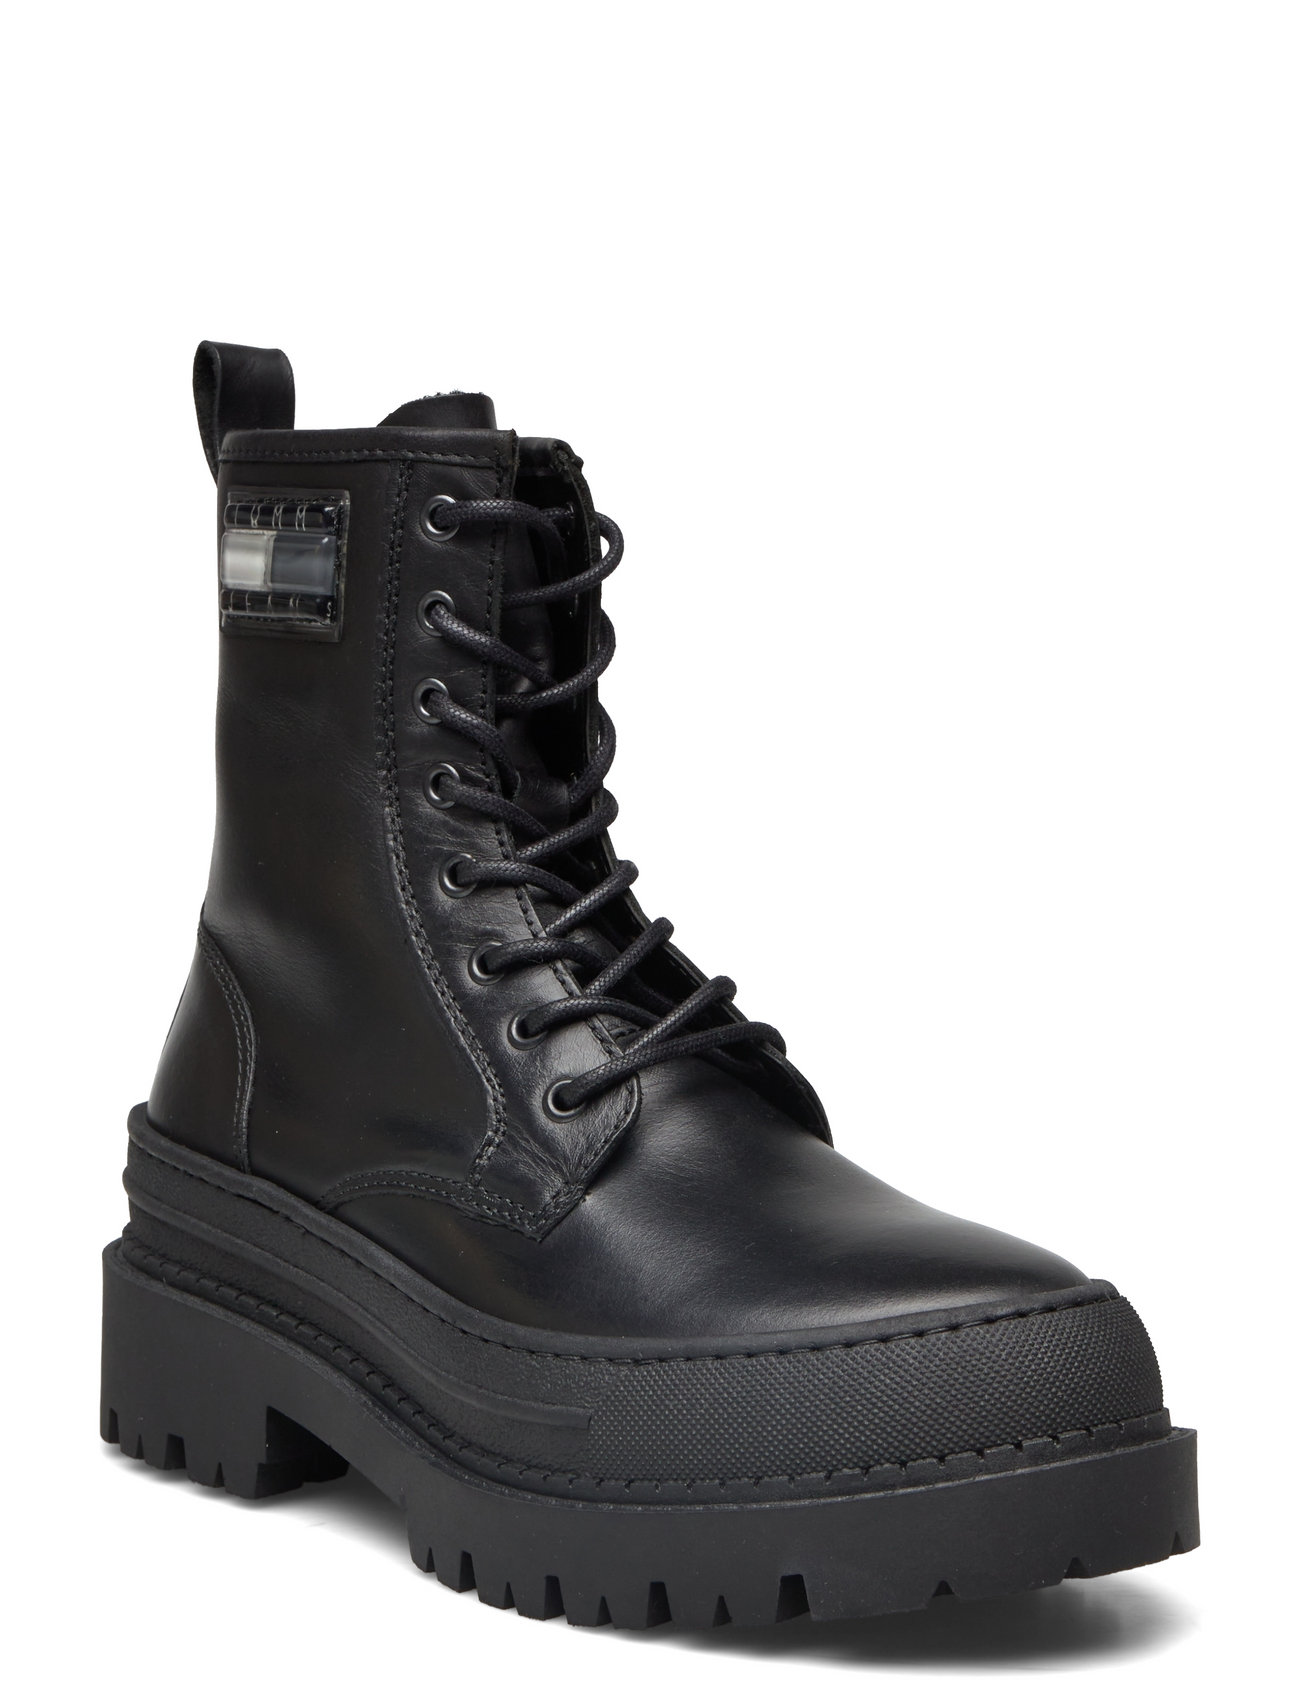 Tjw Foxing Lace Up Leather Boot Shoes Boots Ankle Boots Laced Boots Black Tommy Hilfiger